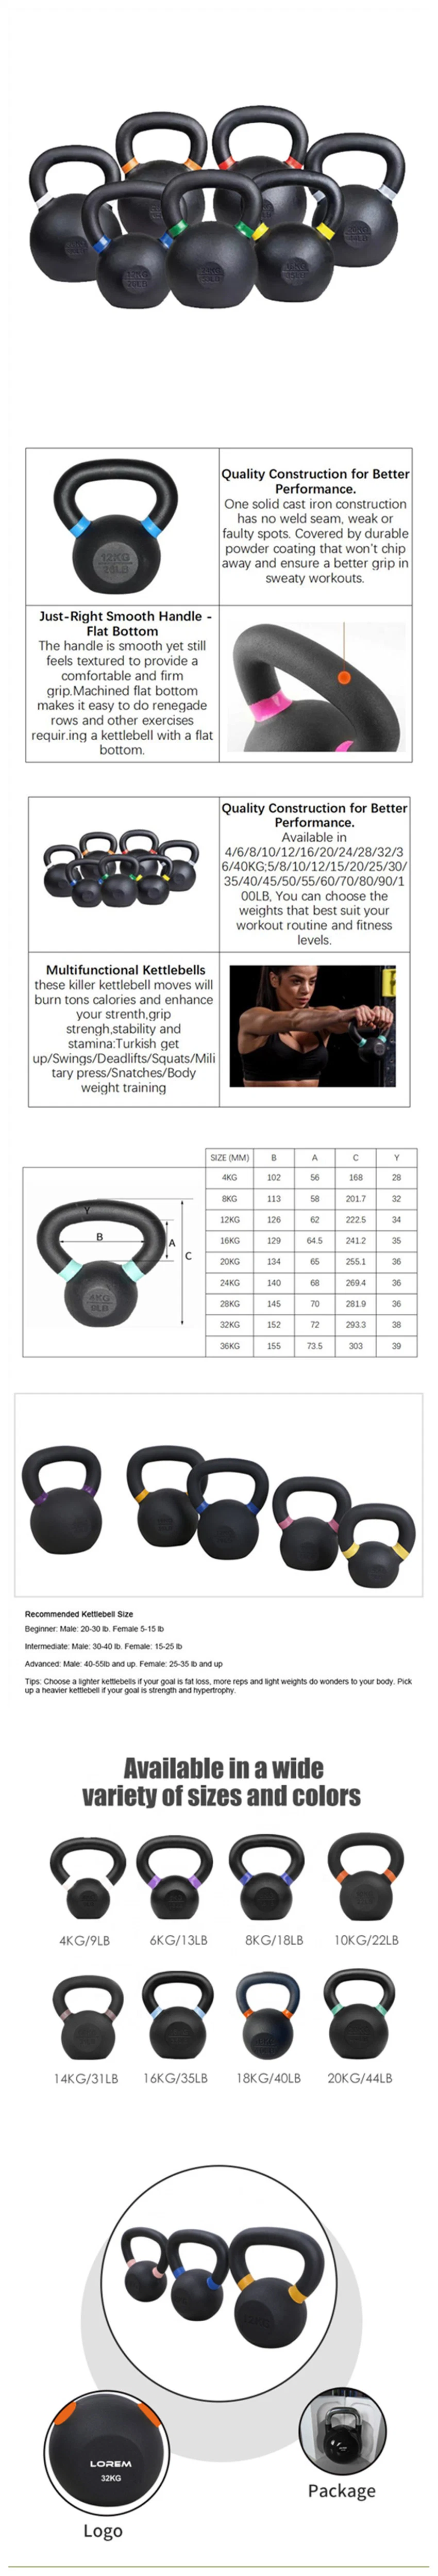 Gravity Powder Painted Cast Iron Kettlebell with Color Strip Owder Coated Casting Iron Kettlebell Cast Iron Kettlebell